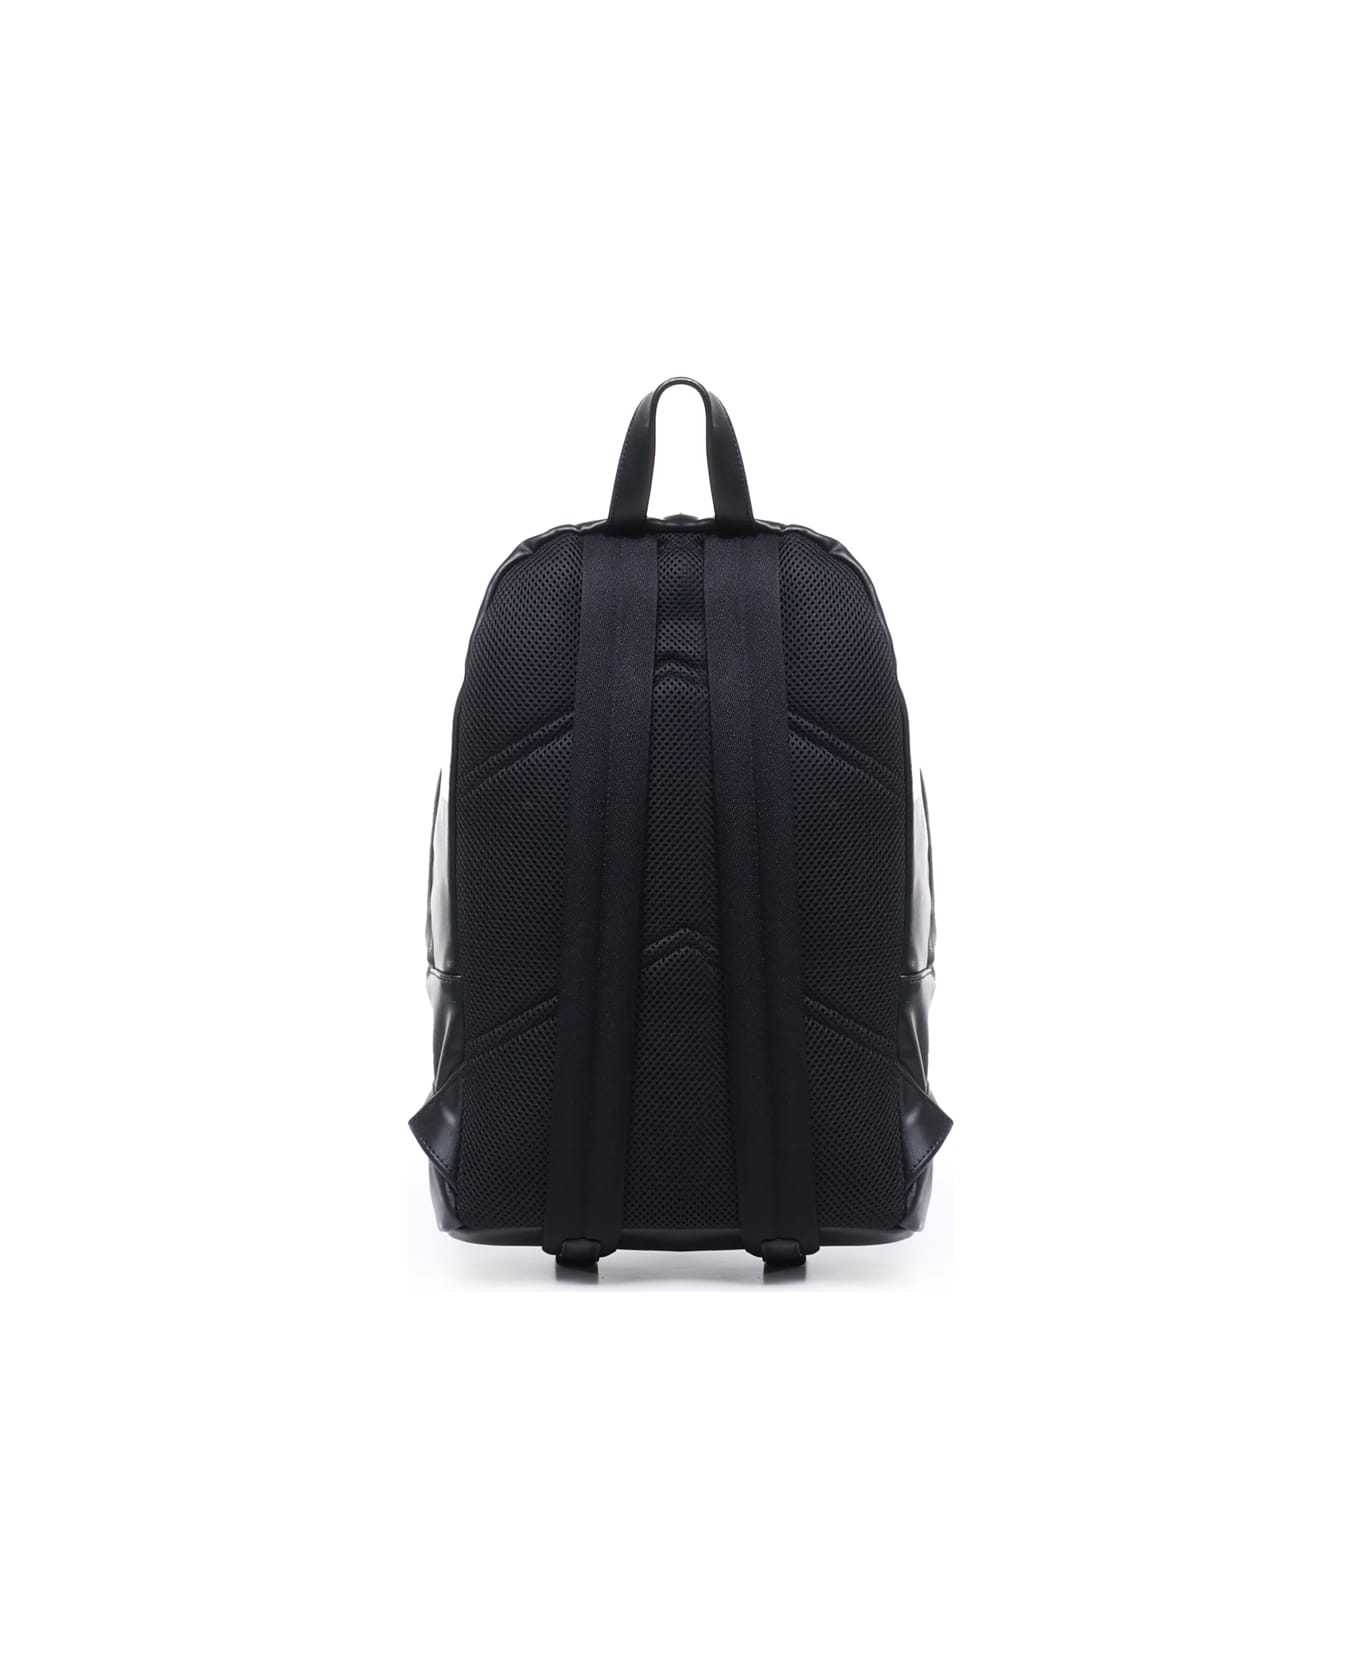 Calvin Klein Faux Leather Backpack - Black